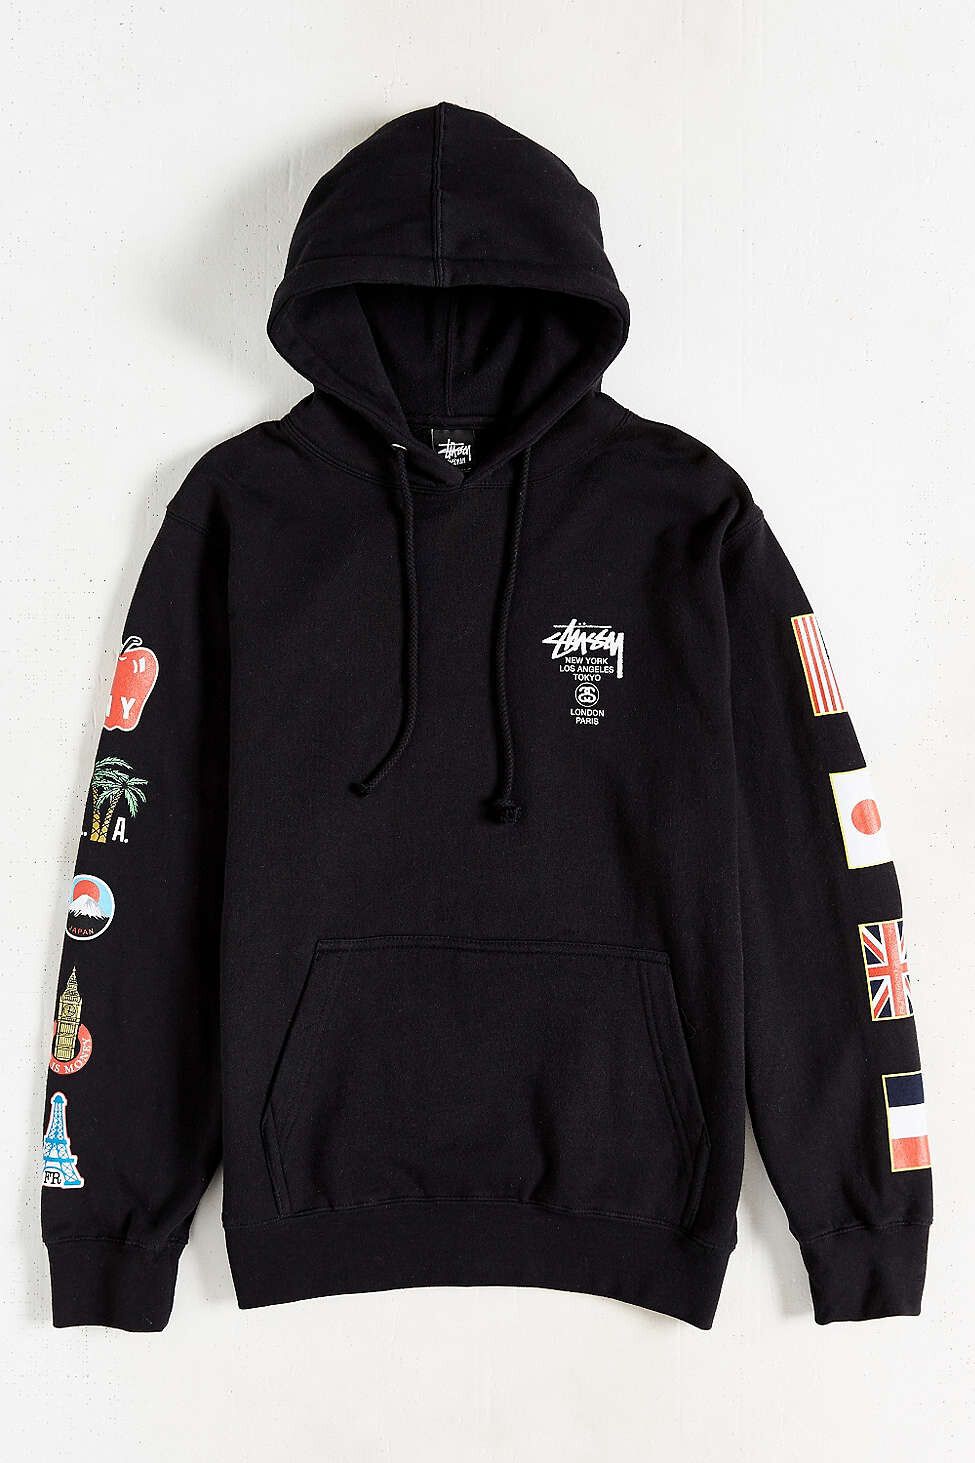 Stussy Stussy World Tour Flags Hoodie Size US M / EU 48-50 / 2 - 1 Preview